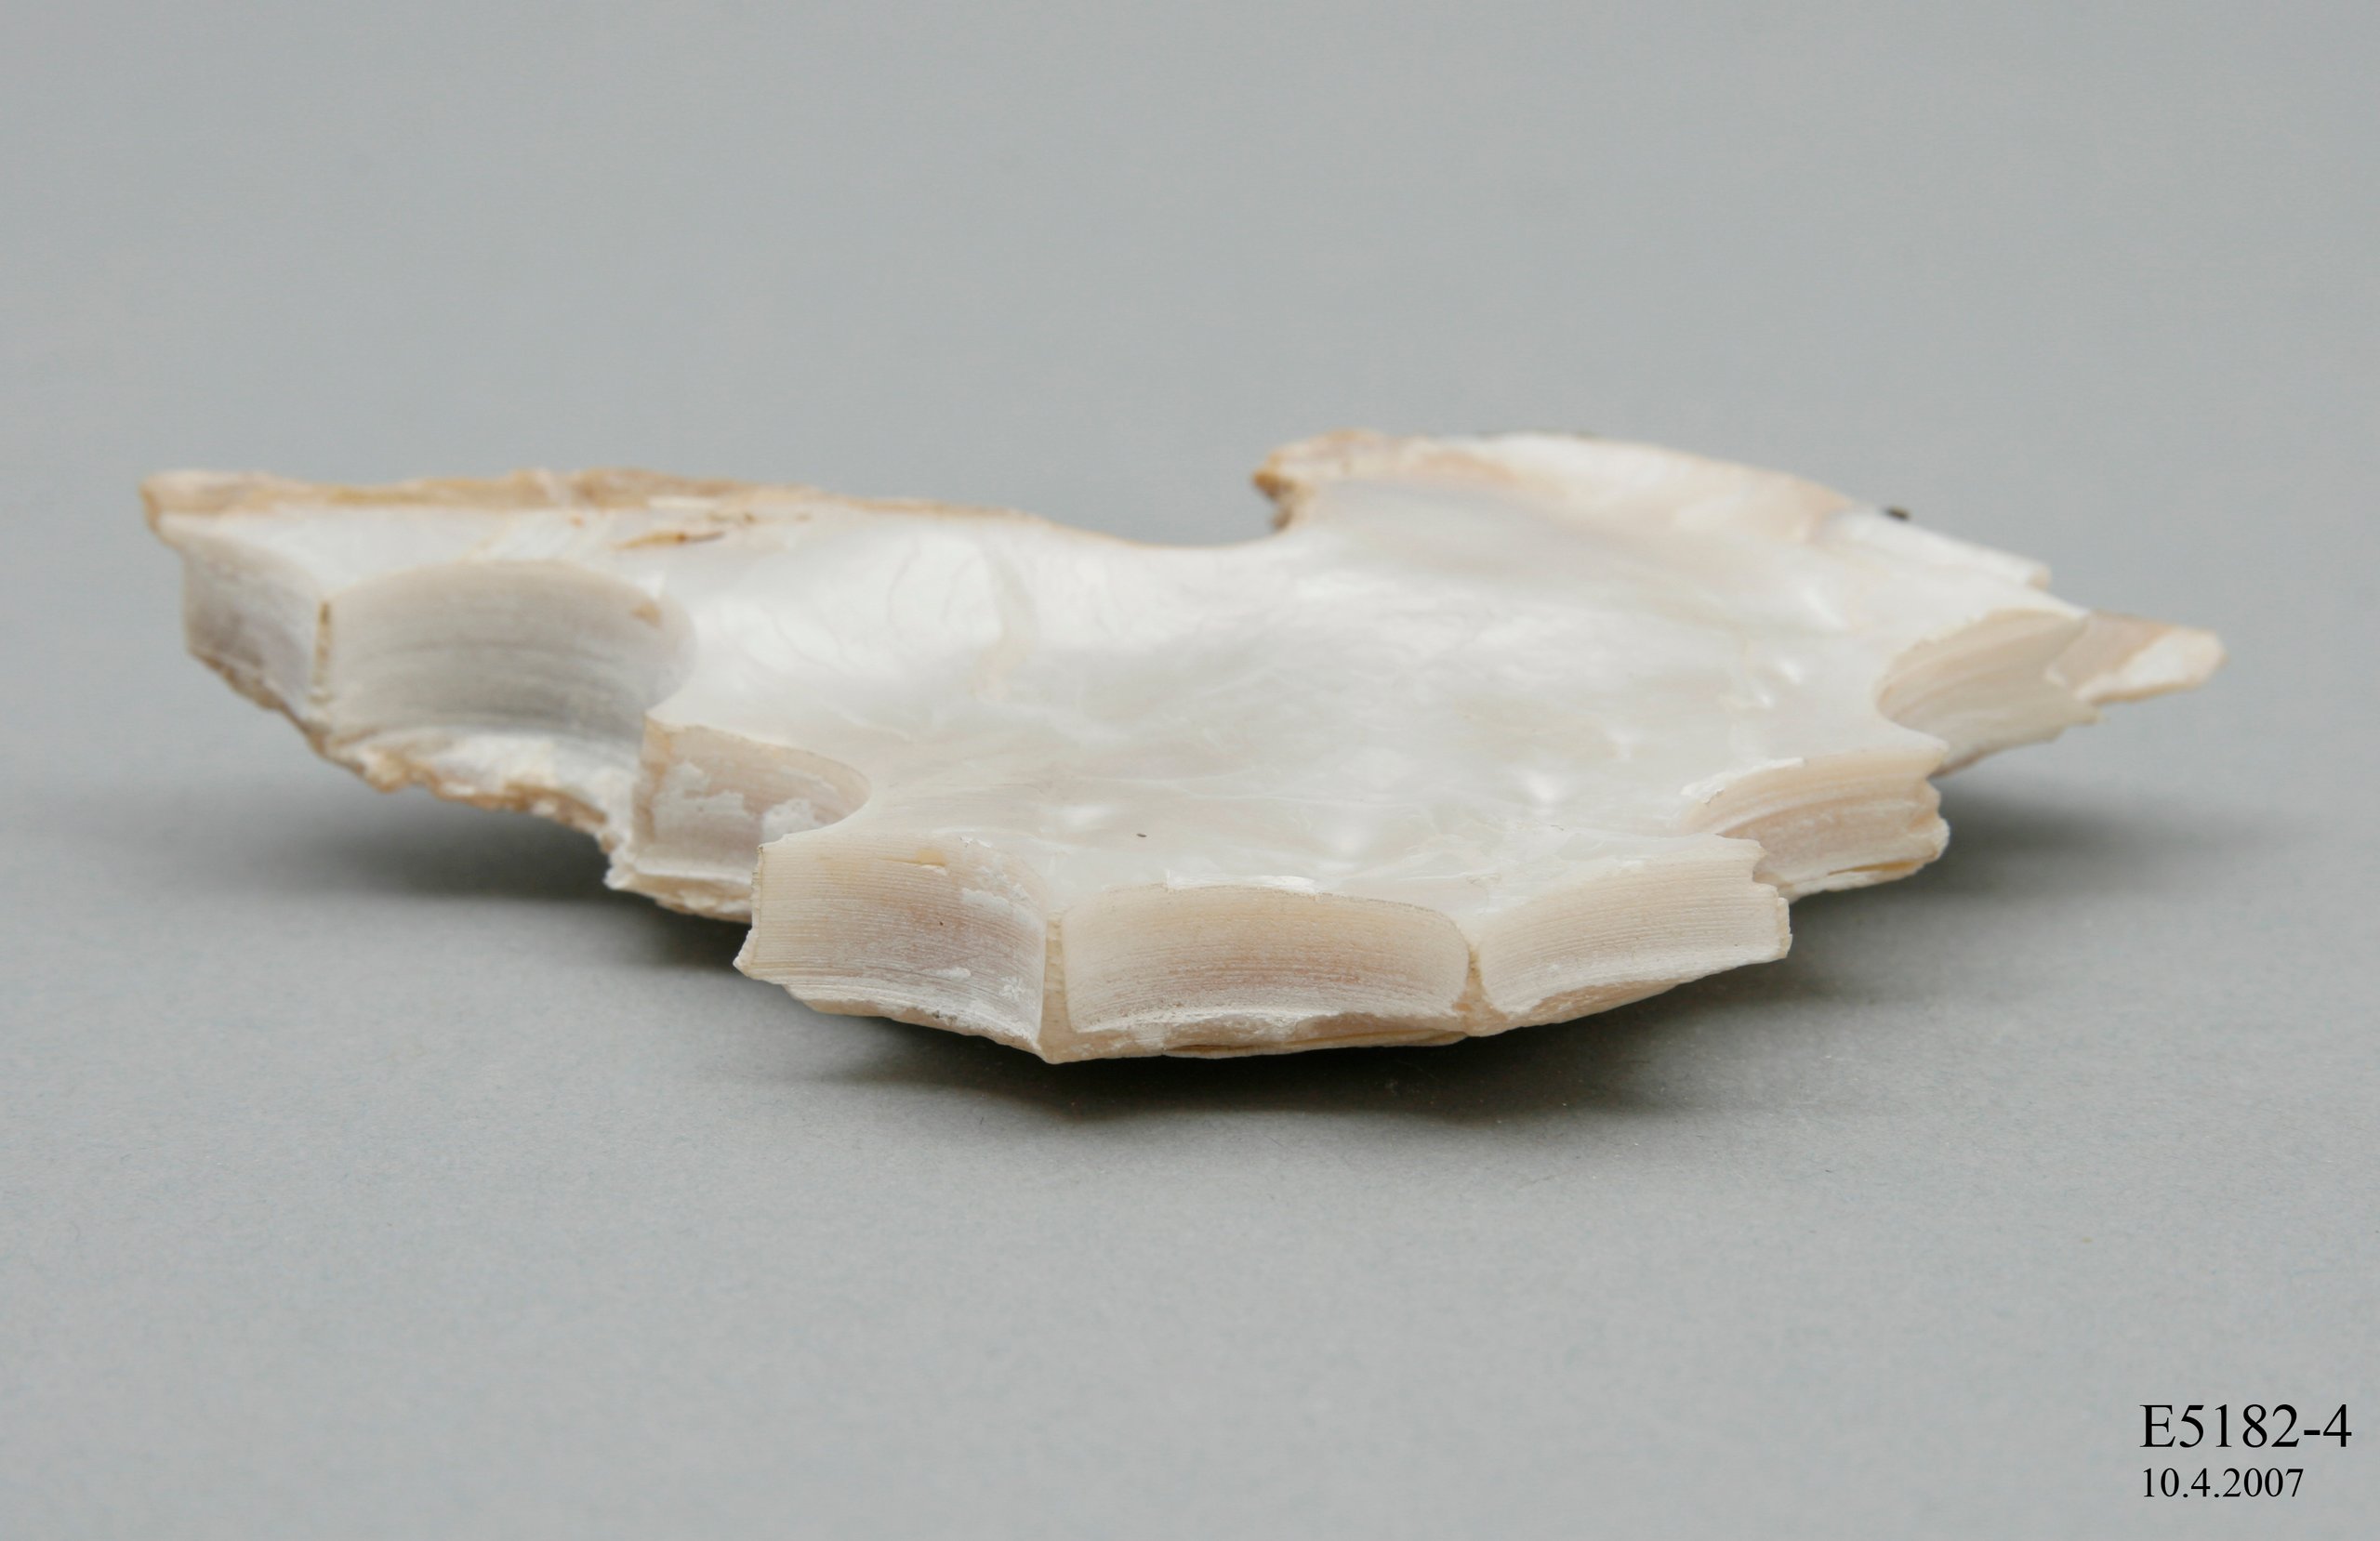 A section of pearl shell used in manufacturing buttons.